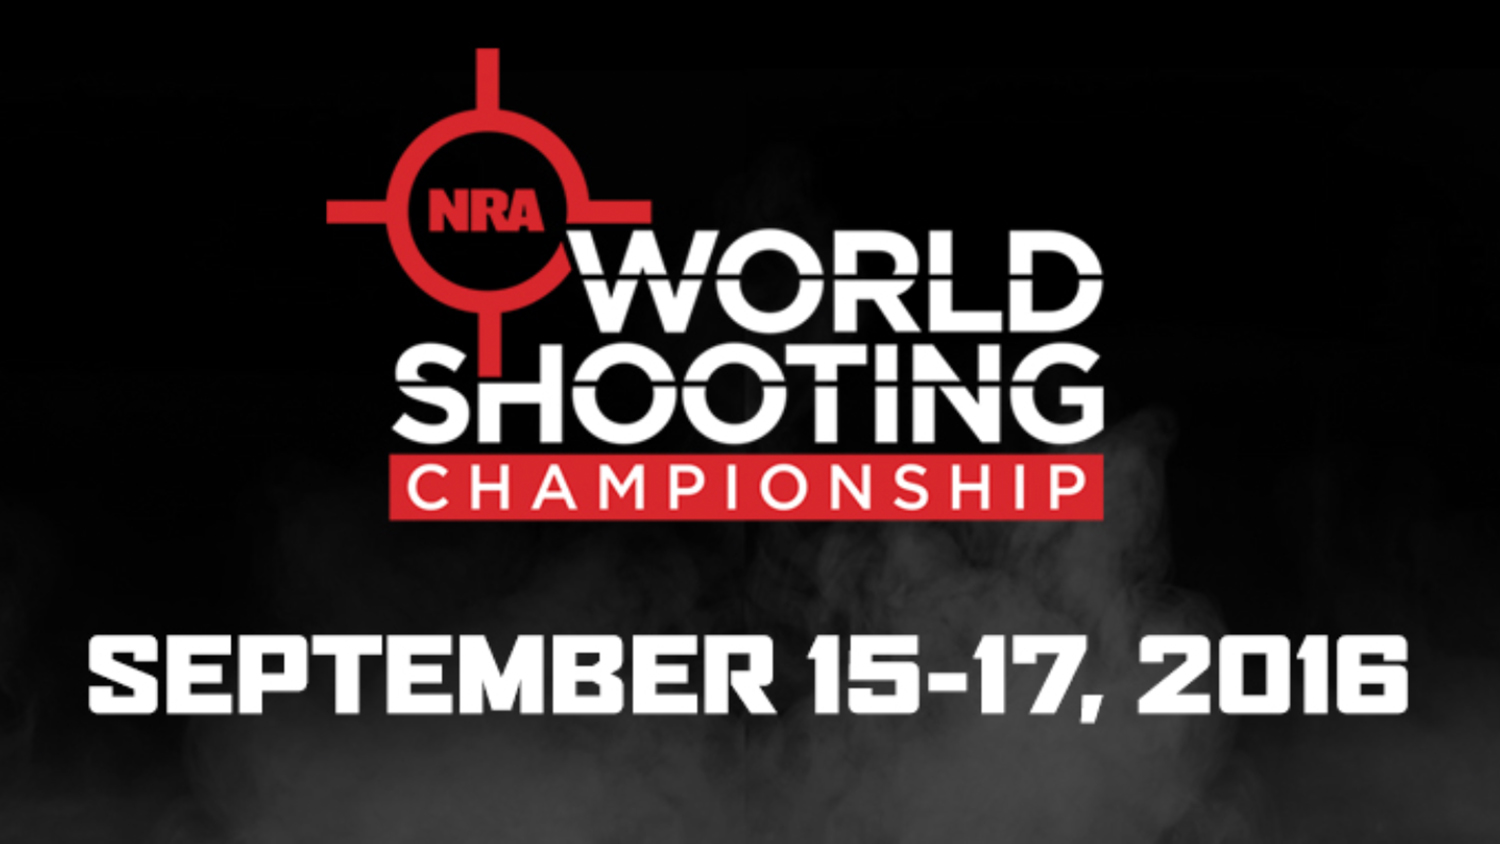 Registration for the 2016 NRA World Shooting Championship is Open!